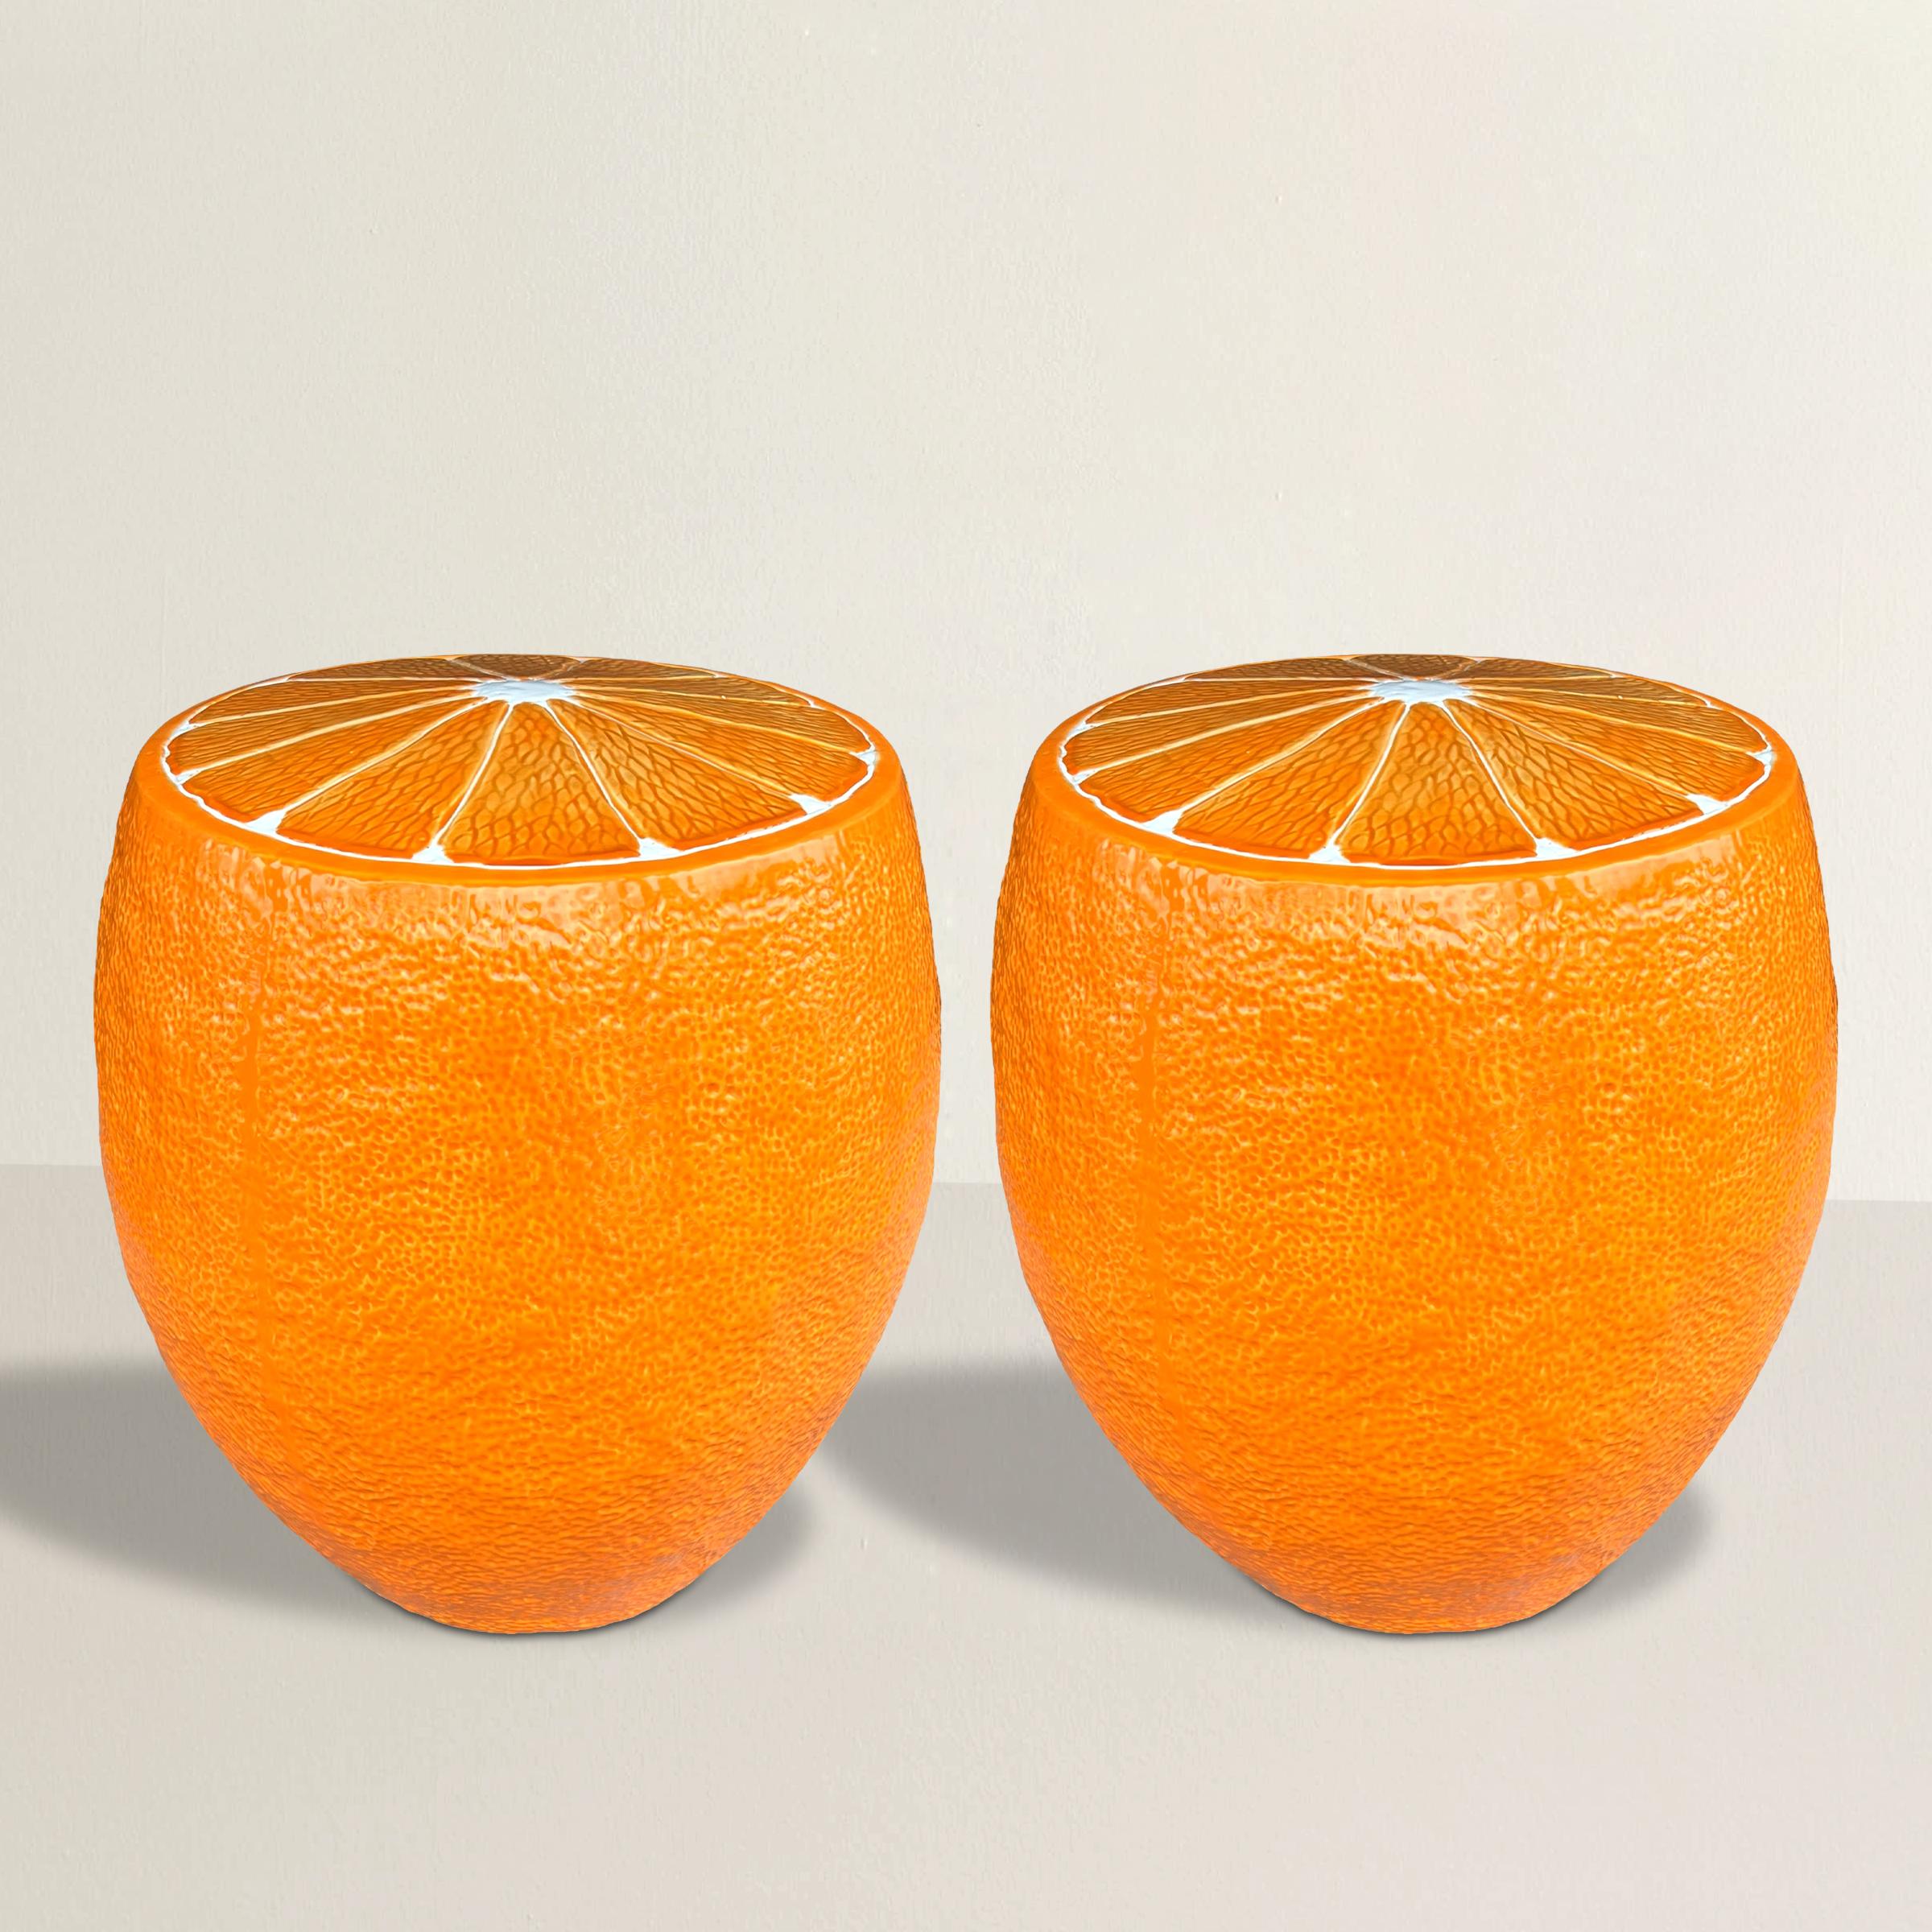 Infuse your space with vibrant charm using this delightful pair of glazed ceramic garden stools, each whimsically fashioned as an orange fruit. The exterior, textured like an orange peel, adds tactile interest, while the tops are artfully sliced